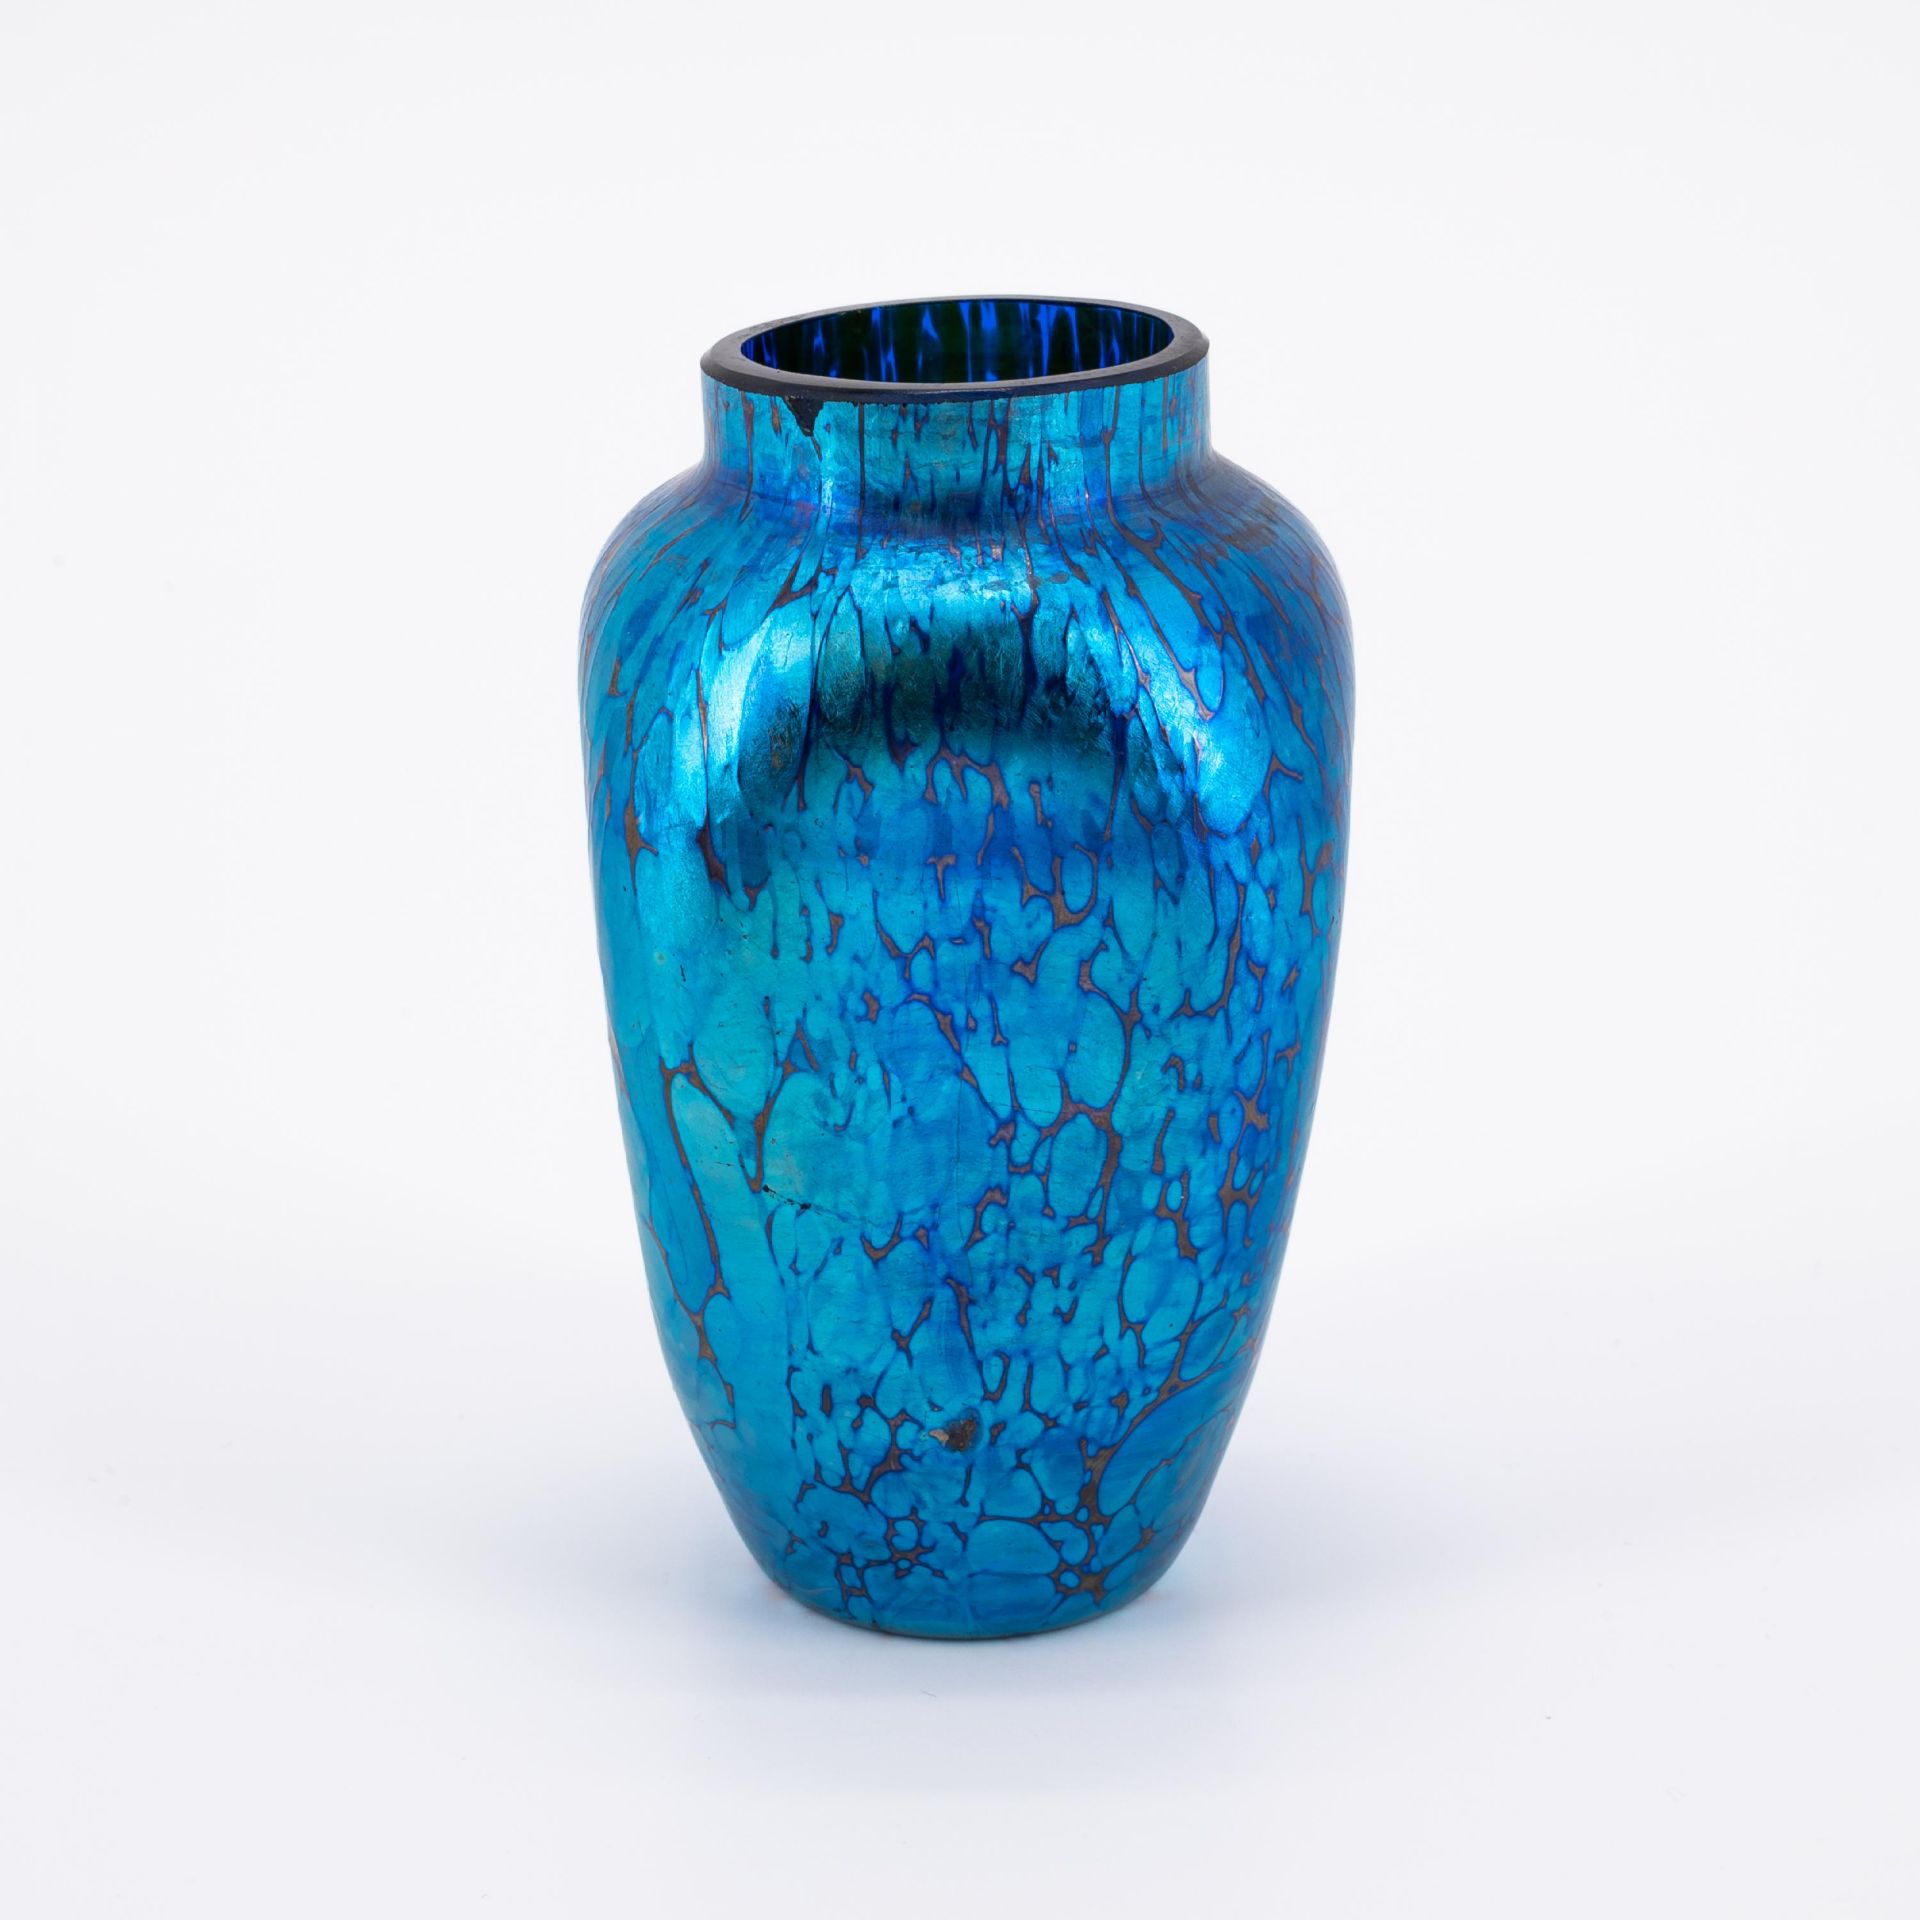 SMALL ELECTRIC-BLUE FAVRILE-GLASS VASE - Image 3 of 6